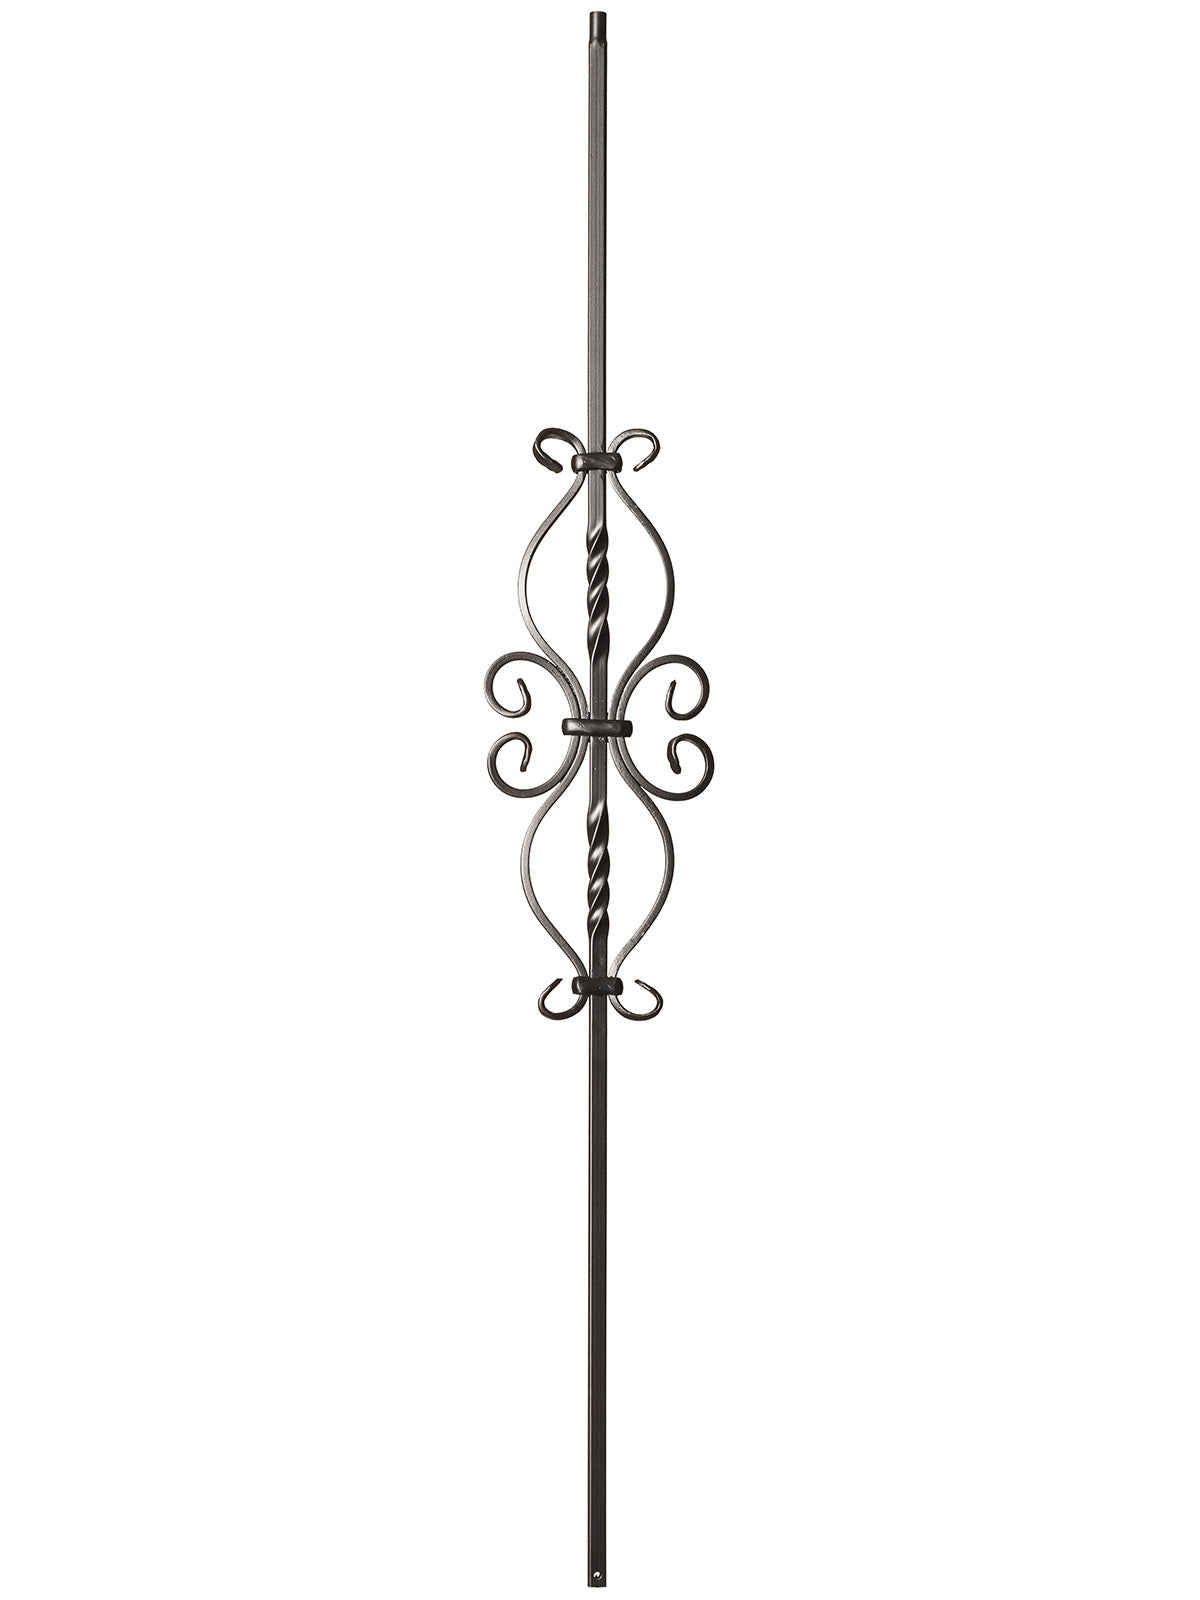 Iron Baluster 9057 - 1/2" Square - Double Twist w/ Dragonfly